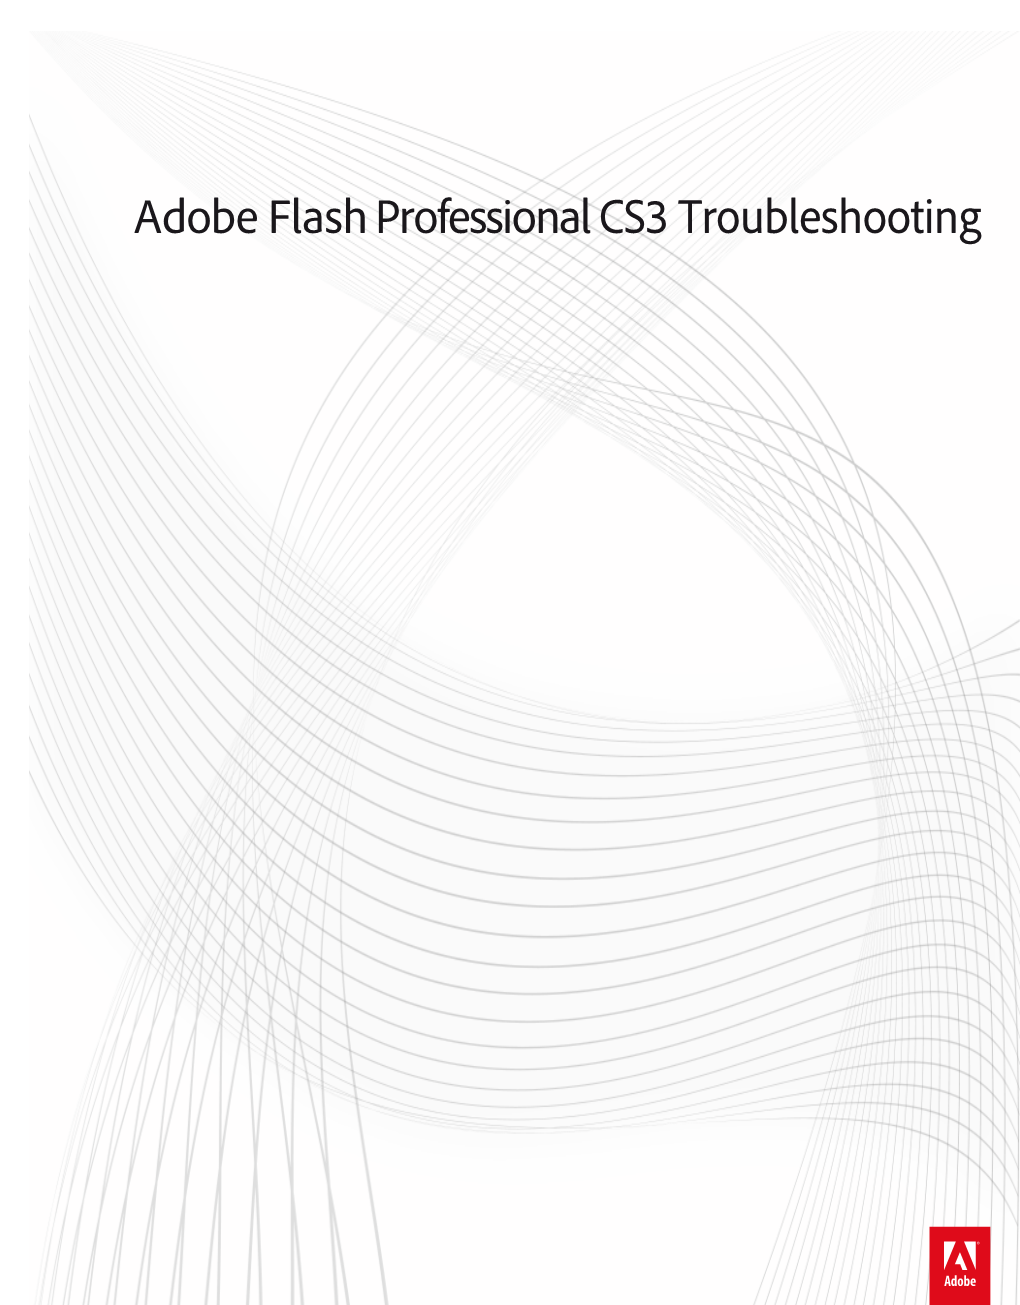 Flash Professional CS3 Troubleshooting Legal Notices